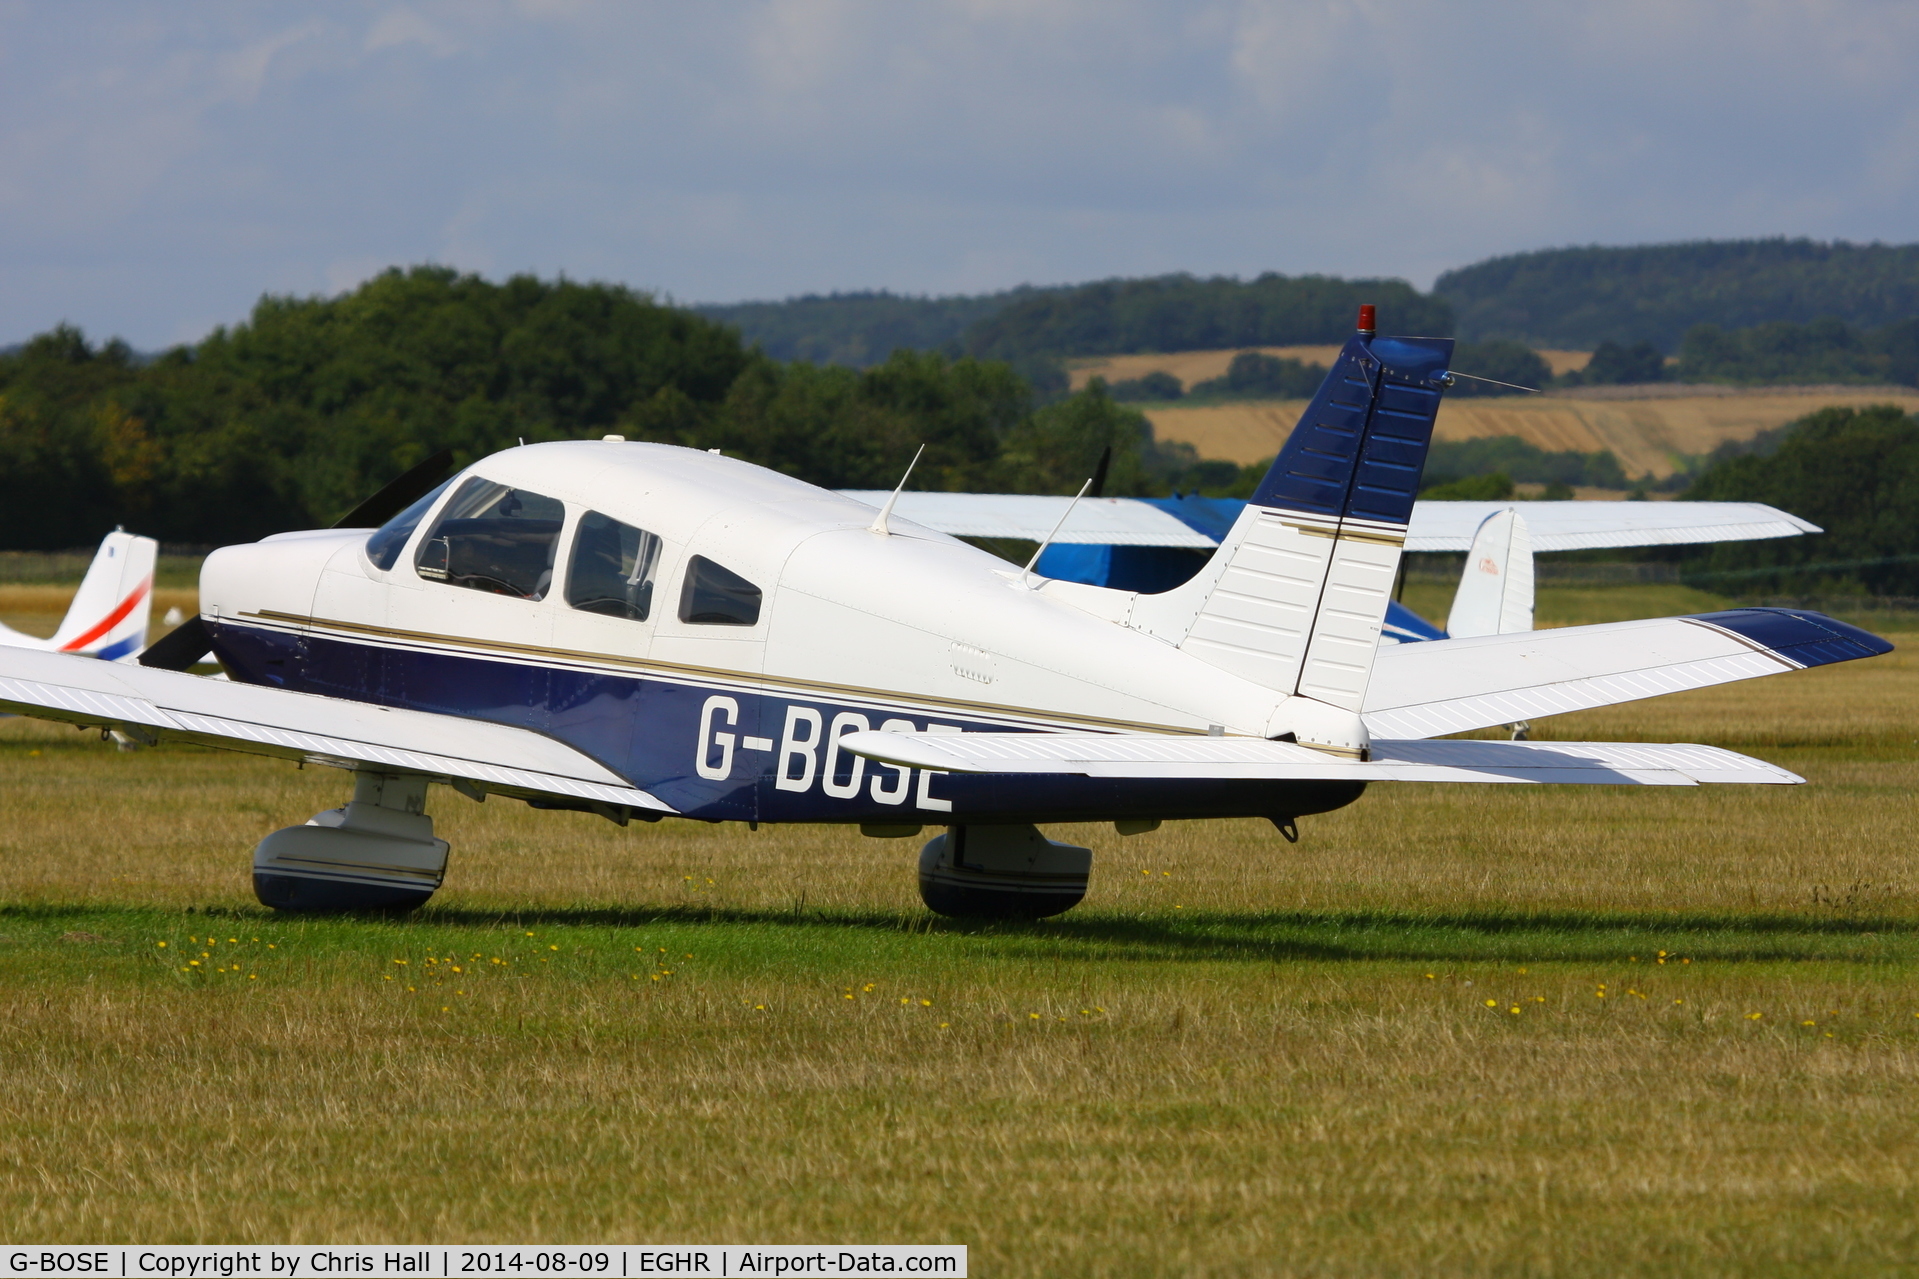 G-BOSE, 1985 Piper PA-28-181 Cherokee Archer II C/N 28-8590007, at Goodwood airfield